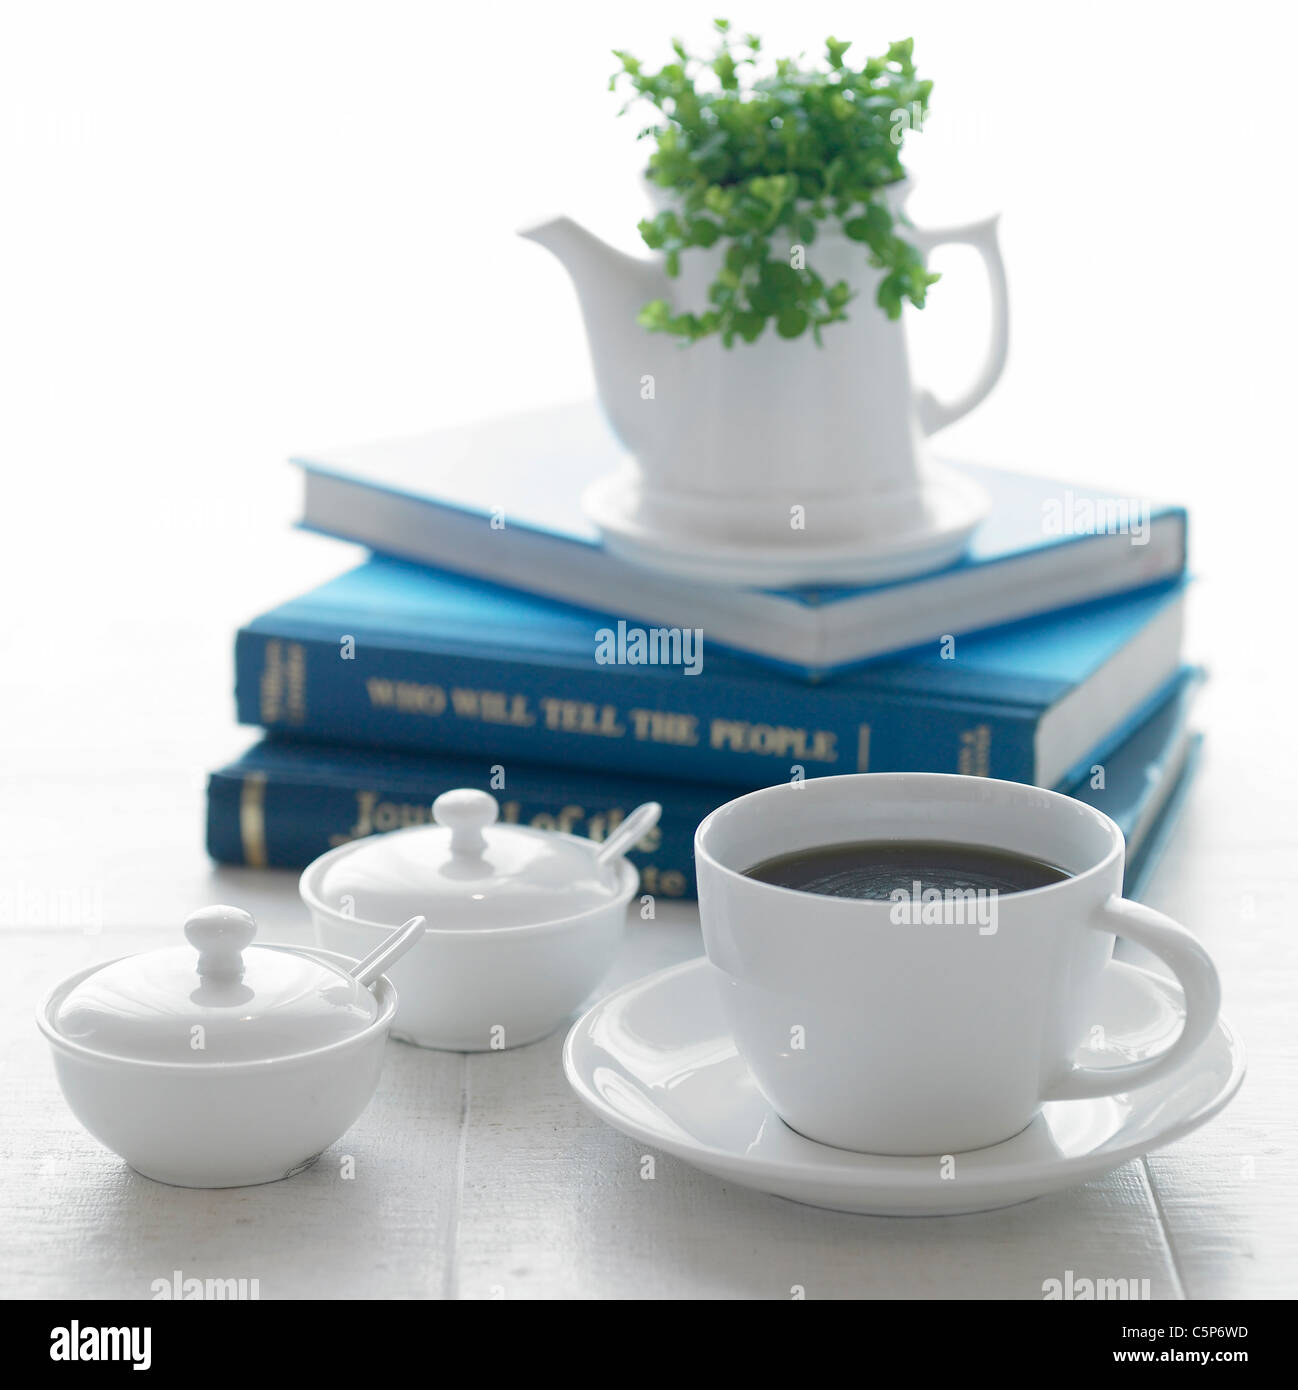 A coffee cup and other objects on a table Stock Photo